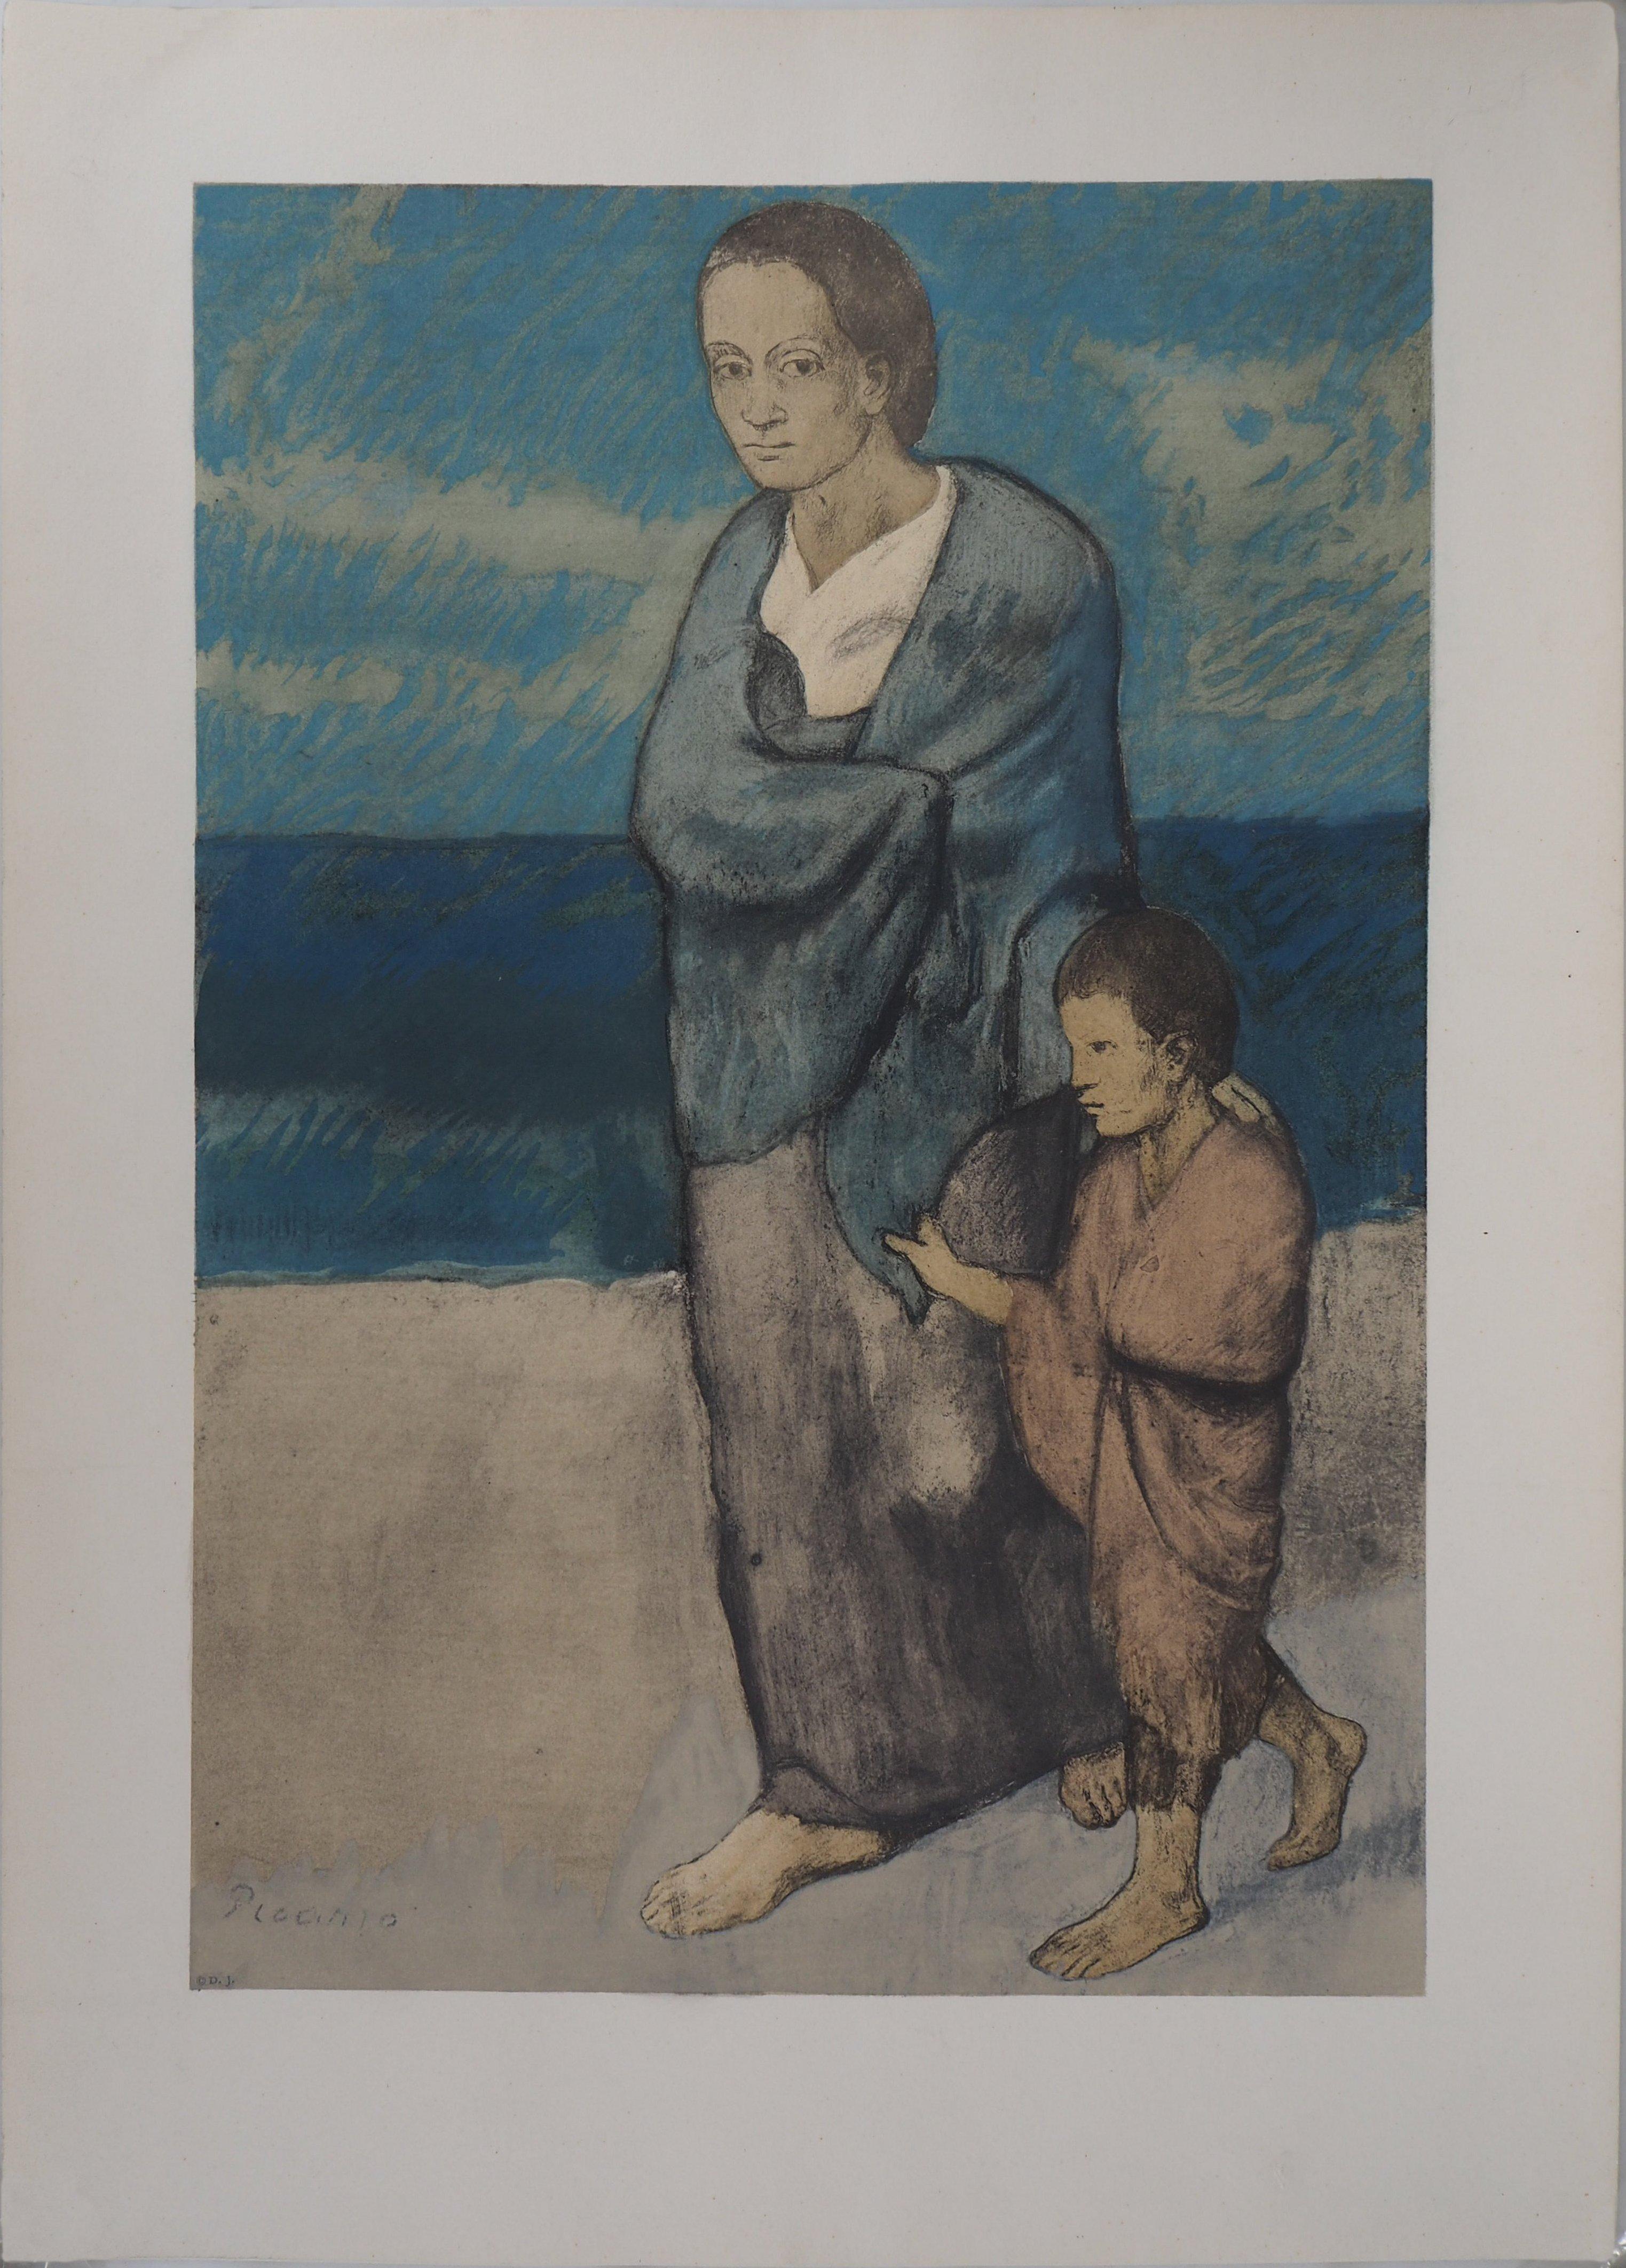 Mother and Child - Lithograph (c. 1950) - Print by (after) Pablo Picasso